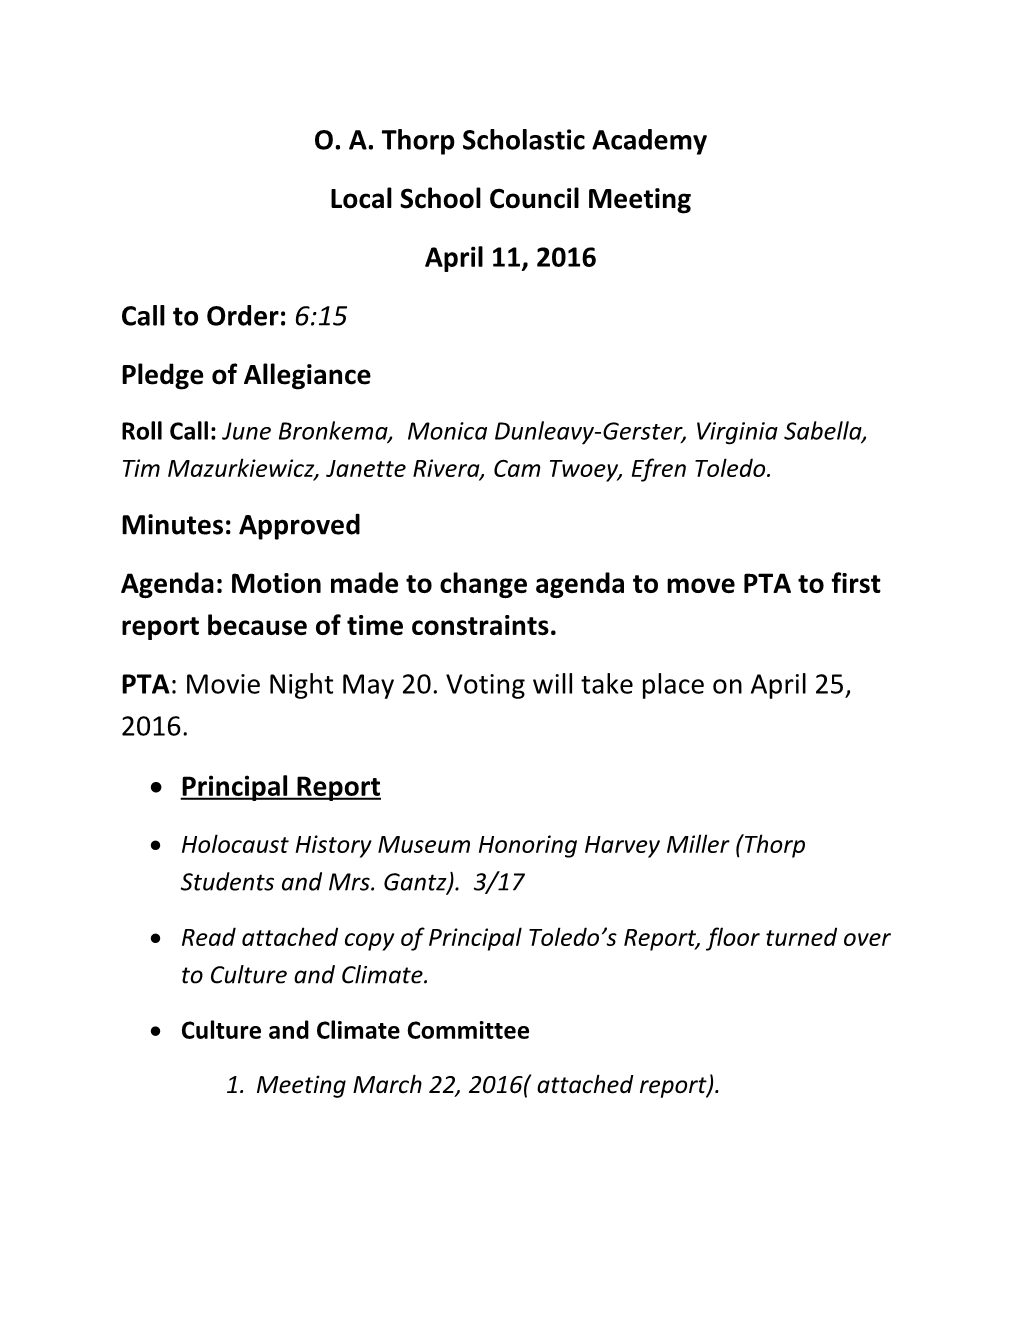 Local School Council Meeting